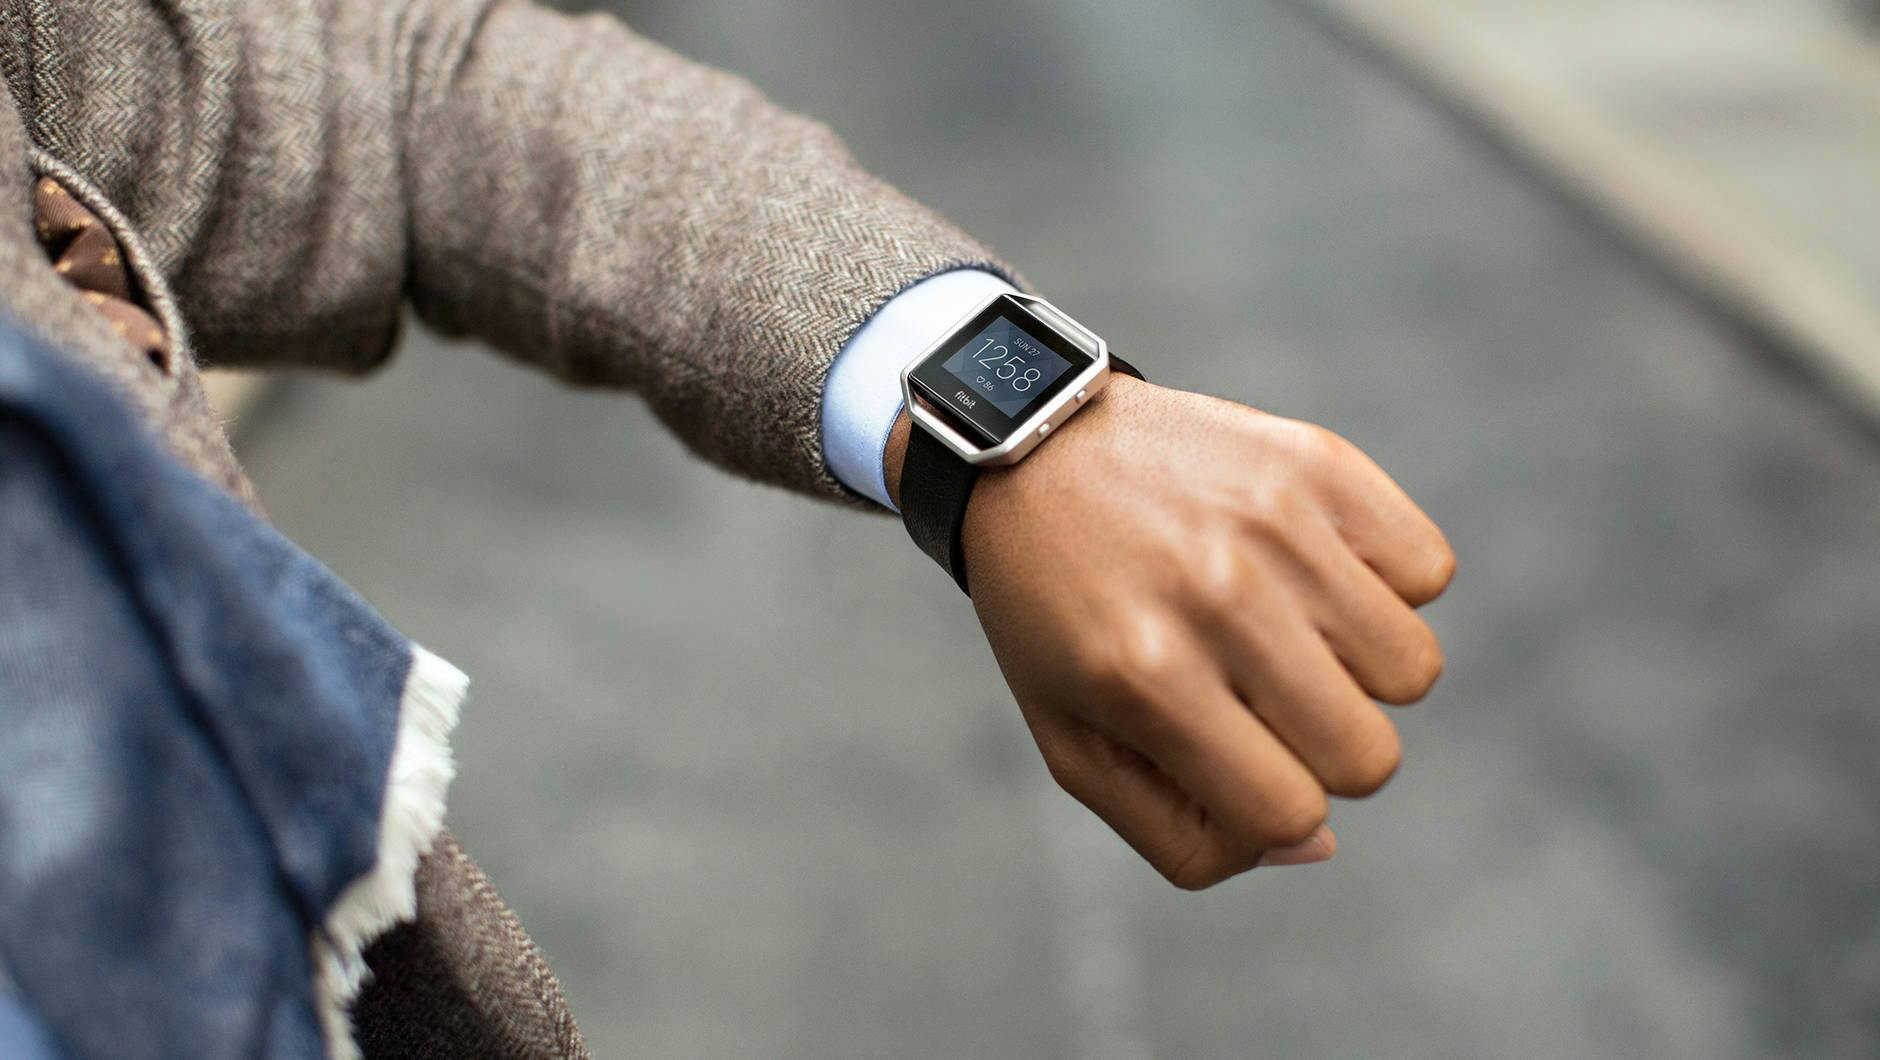 Watch: There Is A New Smart Watch On The Market